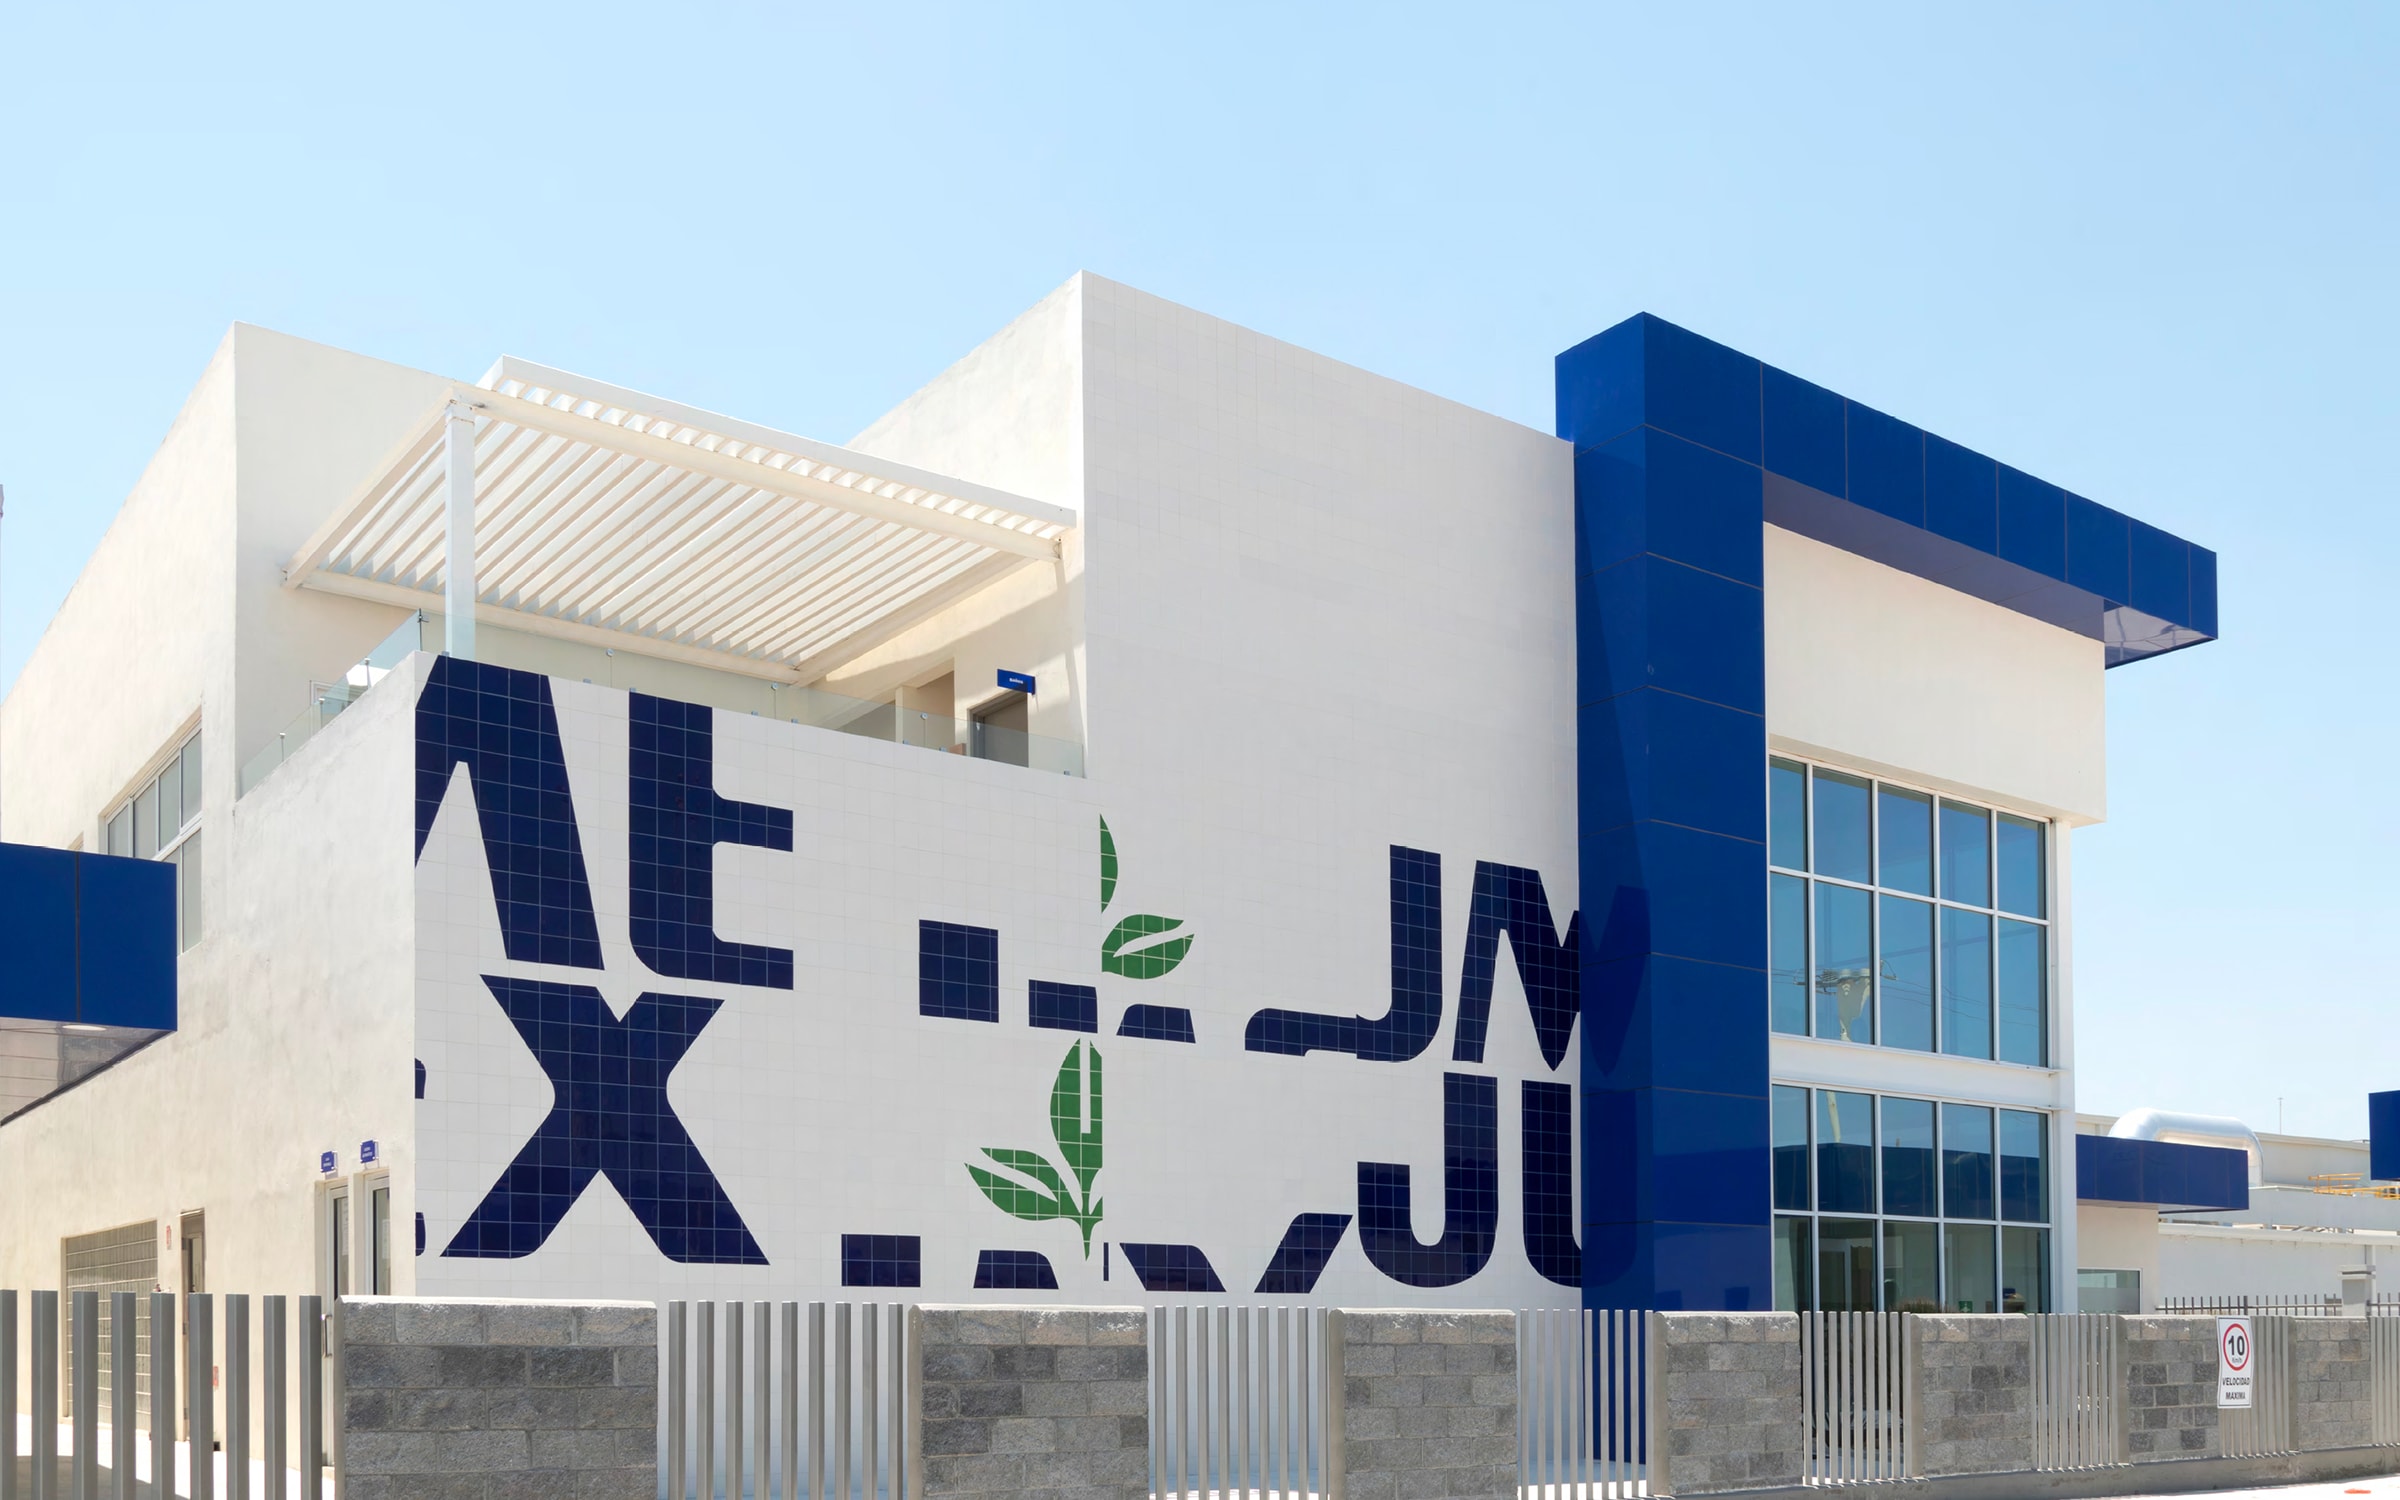 Jumex factory, Monterrey (Mexico). Image courtesy of the Museo Jumex, Mexico City. Work by Dario Escobar, Sans titre, 2023. Courtesy of the artist.